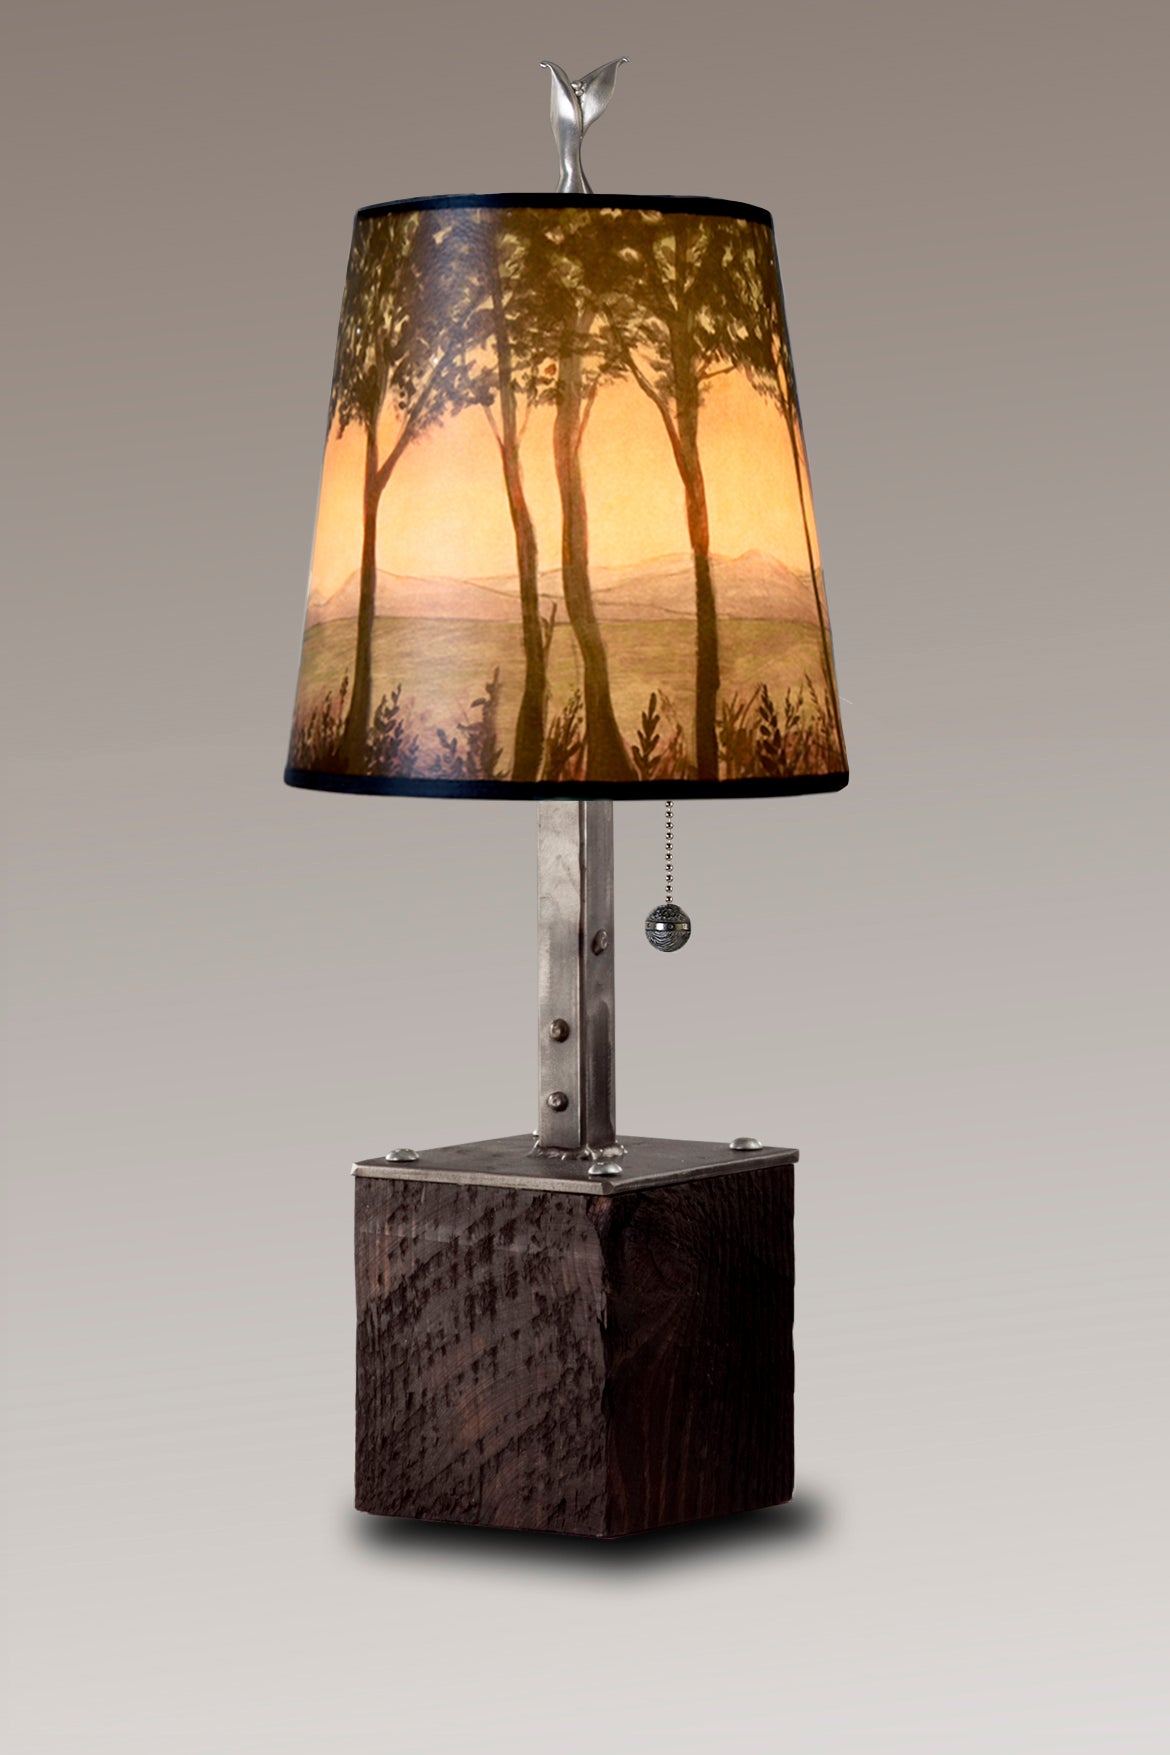 Janna Ugone & Co Table Lamps Steel Table Lamp on Reclaimed Wood with Small Drum Shade in Dawn